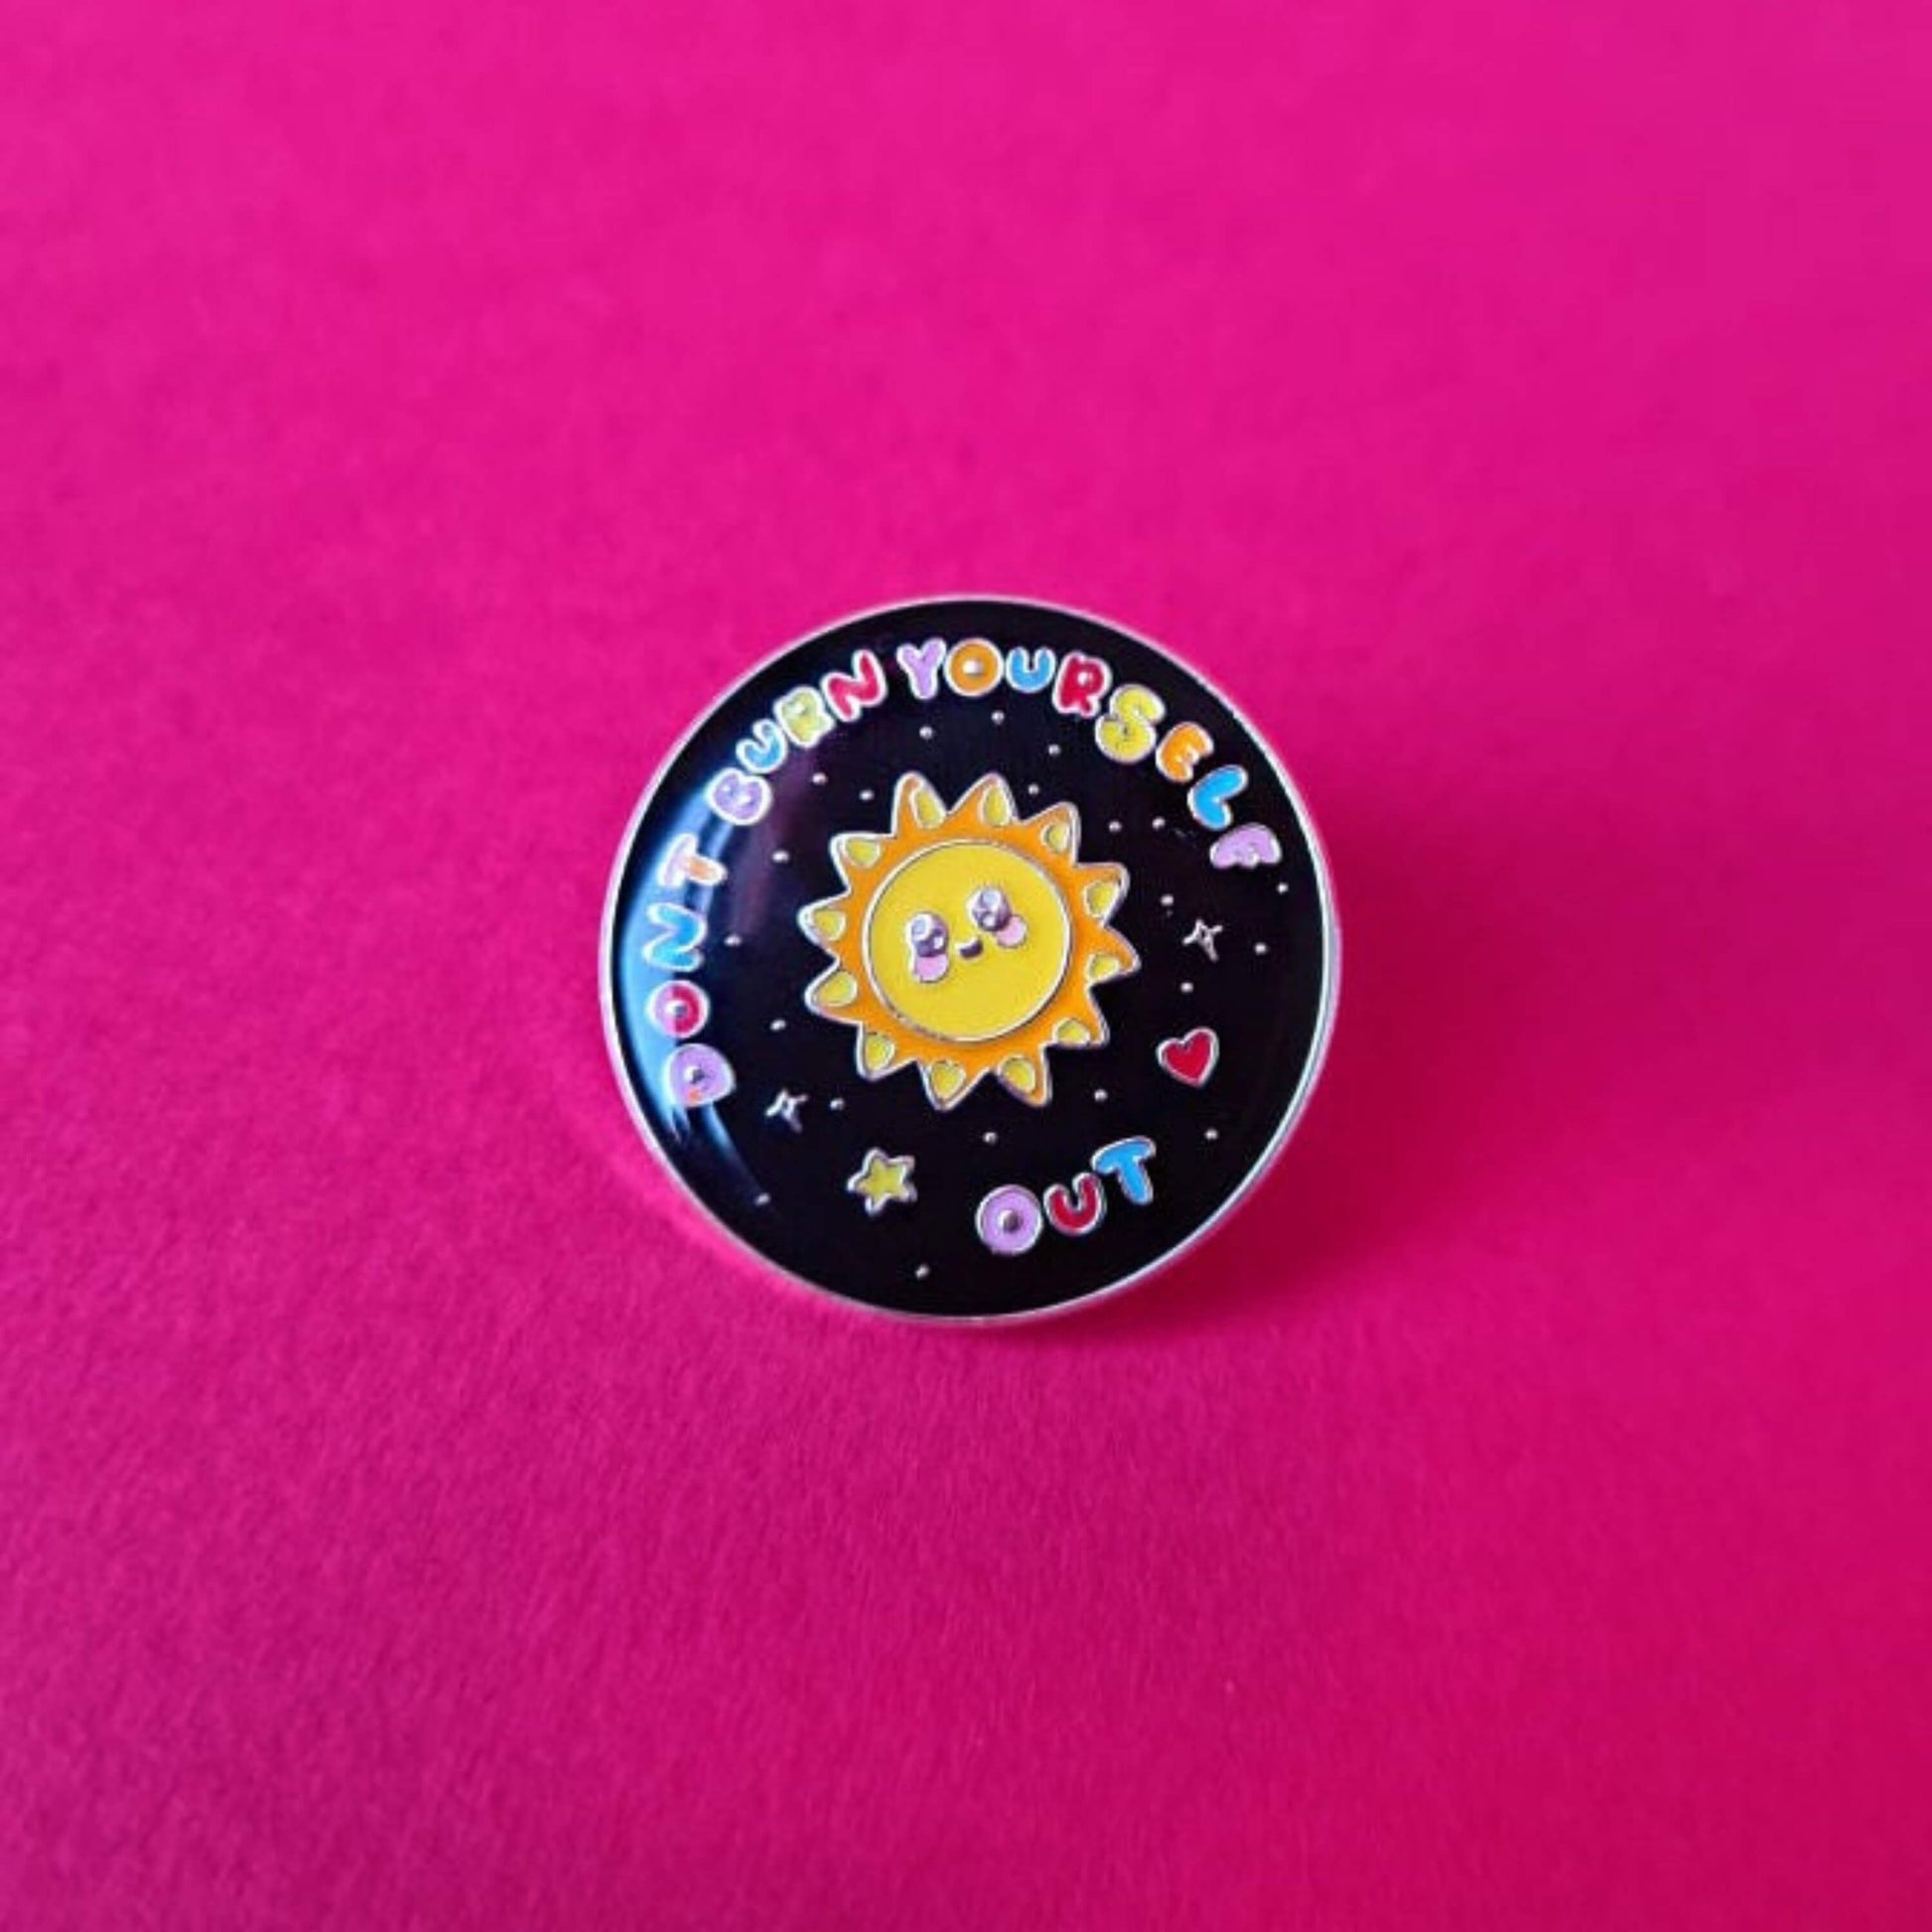 The Don't Burn Yourself Out Sunshine Enamel Pin being on a red background. The circle shaped pin badge is a black base with a yellow smiling sunshine in the centre with rainbow text surrounding it reading 'don't burn yourself out' along with a red heart, yellow star and silver sparkles. The design was created as a gentle reminder to practise self care.